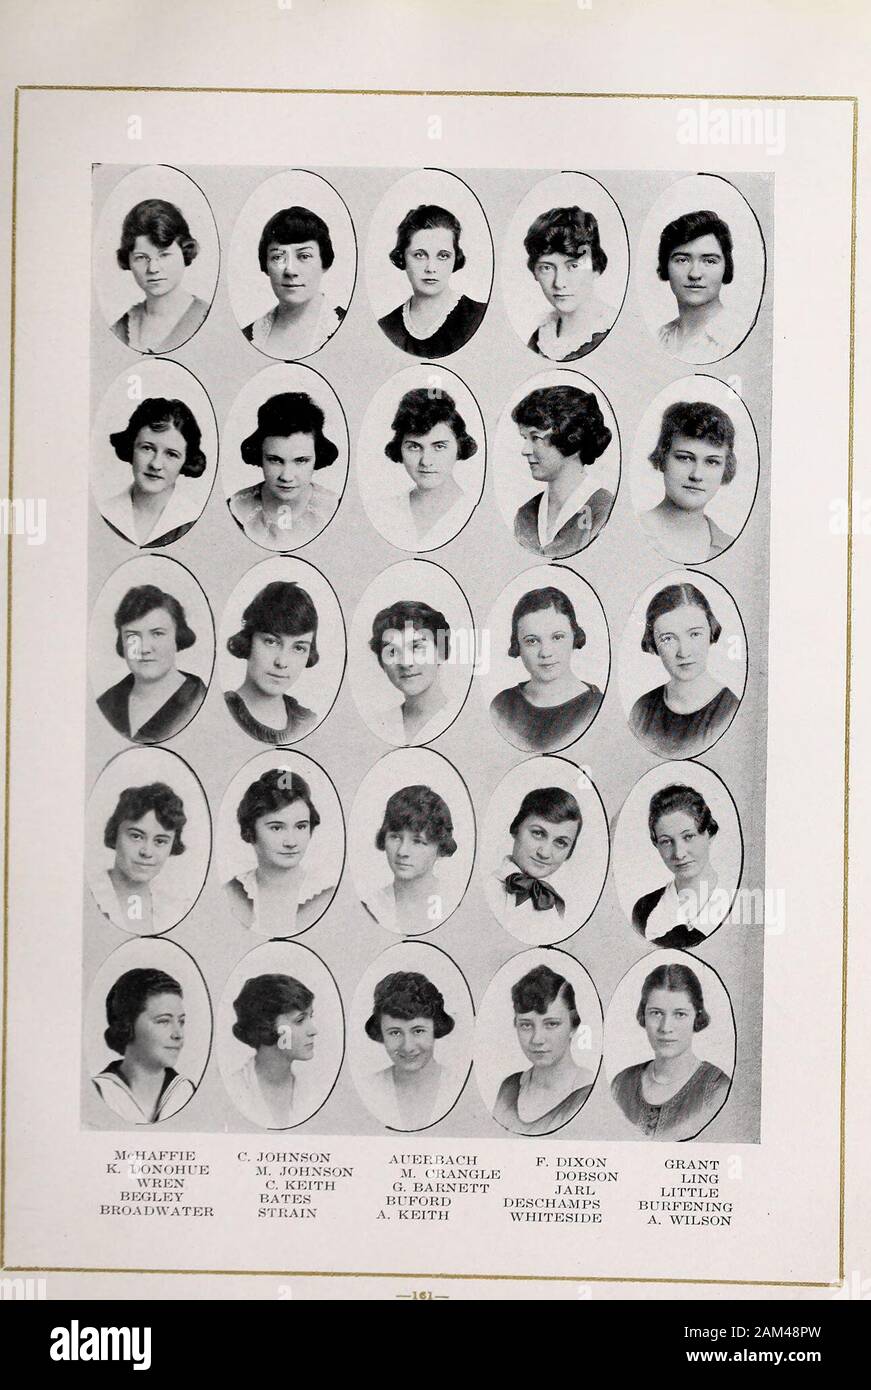 The sentinel . pa Kappa Gamma (Beta Phi Chapter—Establish March, 1909)Sorores in Urbe EDNA FAY McCORMICK MARY ELROD ISABEL RONAN LYLE NOBLE MAUD McCULLOUGH TURNER THULA TOOLE WEISEL ANNABEL ROSS DOROTHY STERLING JOSEPHINE HUNT FORBES ETHEL DICKENSON LEECH ABBIE LUCY SWIFT MARGARET LUCY THANE EDNA RANKIN McKINNON MARJORIE ROSS TOOLE MRS. MARGARET STONE IRENE MURRAY LANSING ELNA PETERSEN ALBERTA STONE LUCILLE CURRAN ADINE CYR EILEEN DONOHUE MULRONEY DOROTHY DONOHUE BROWN RUTH WORDEN MRS. IRA B. FEE MRS. RUSSELL GWINN MRS. GEORGE COFFMAN Sorores in Facultate MISS LUCILLE LEYDA Sorores in Universi Stock Photo